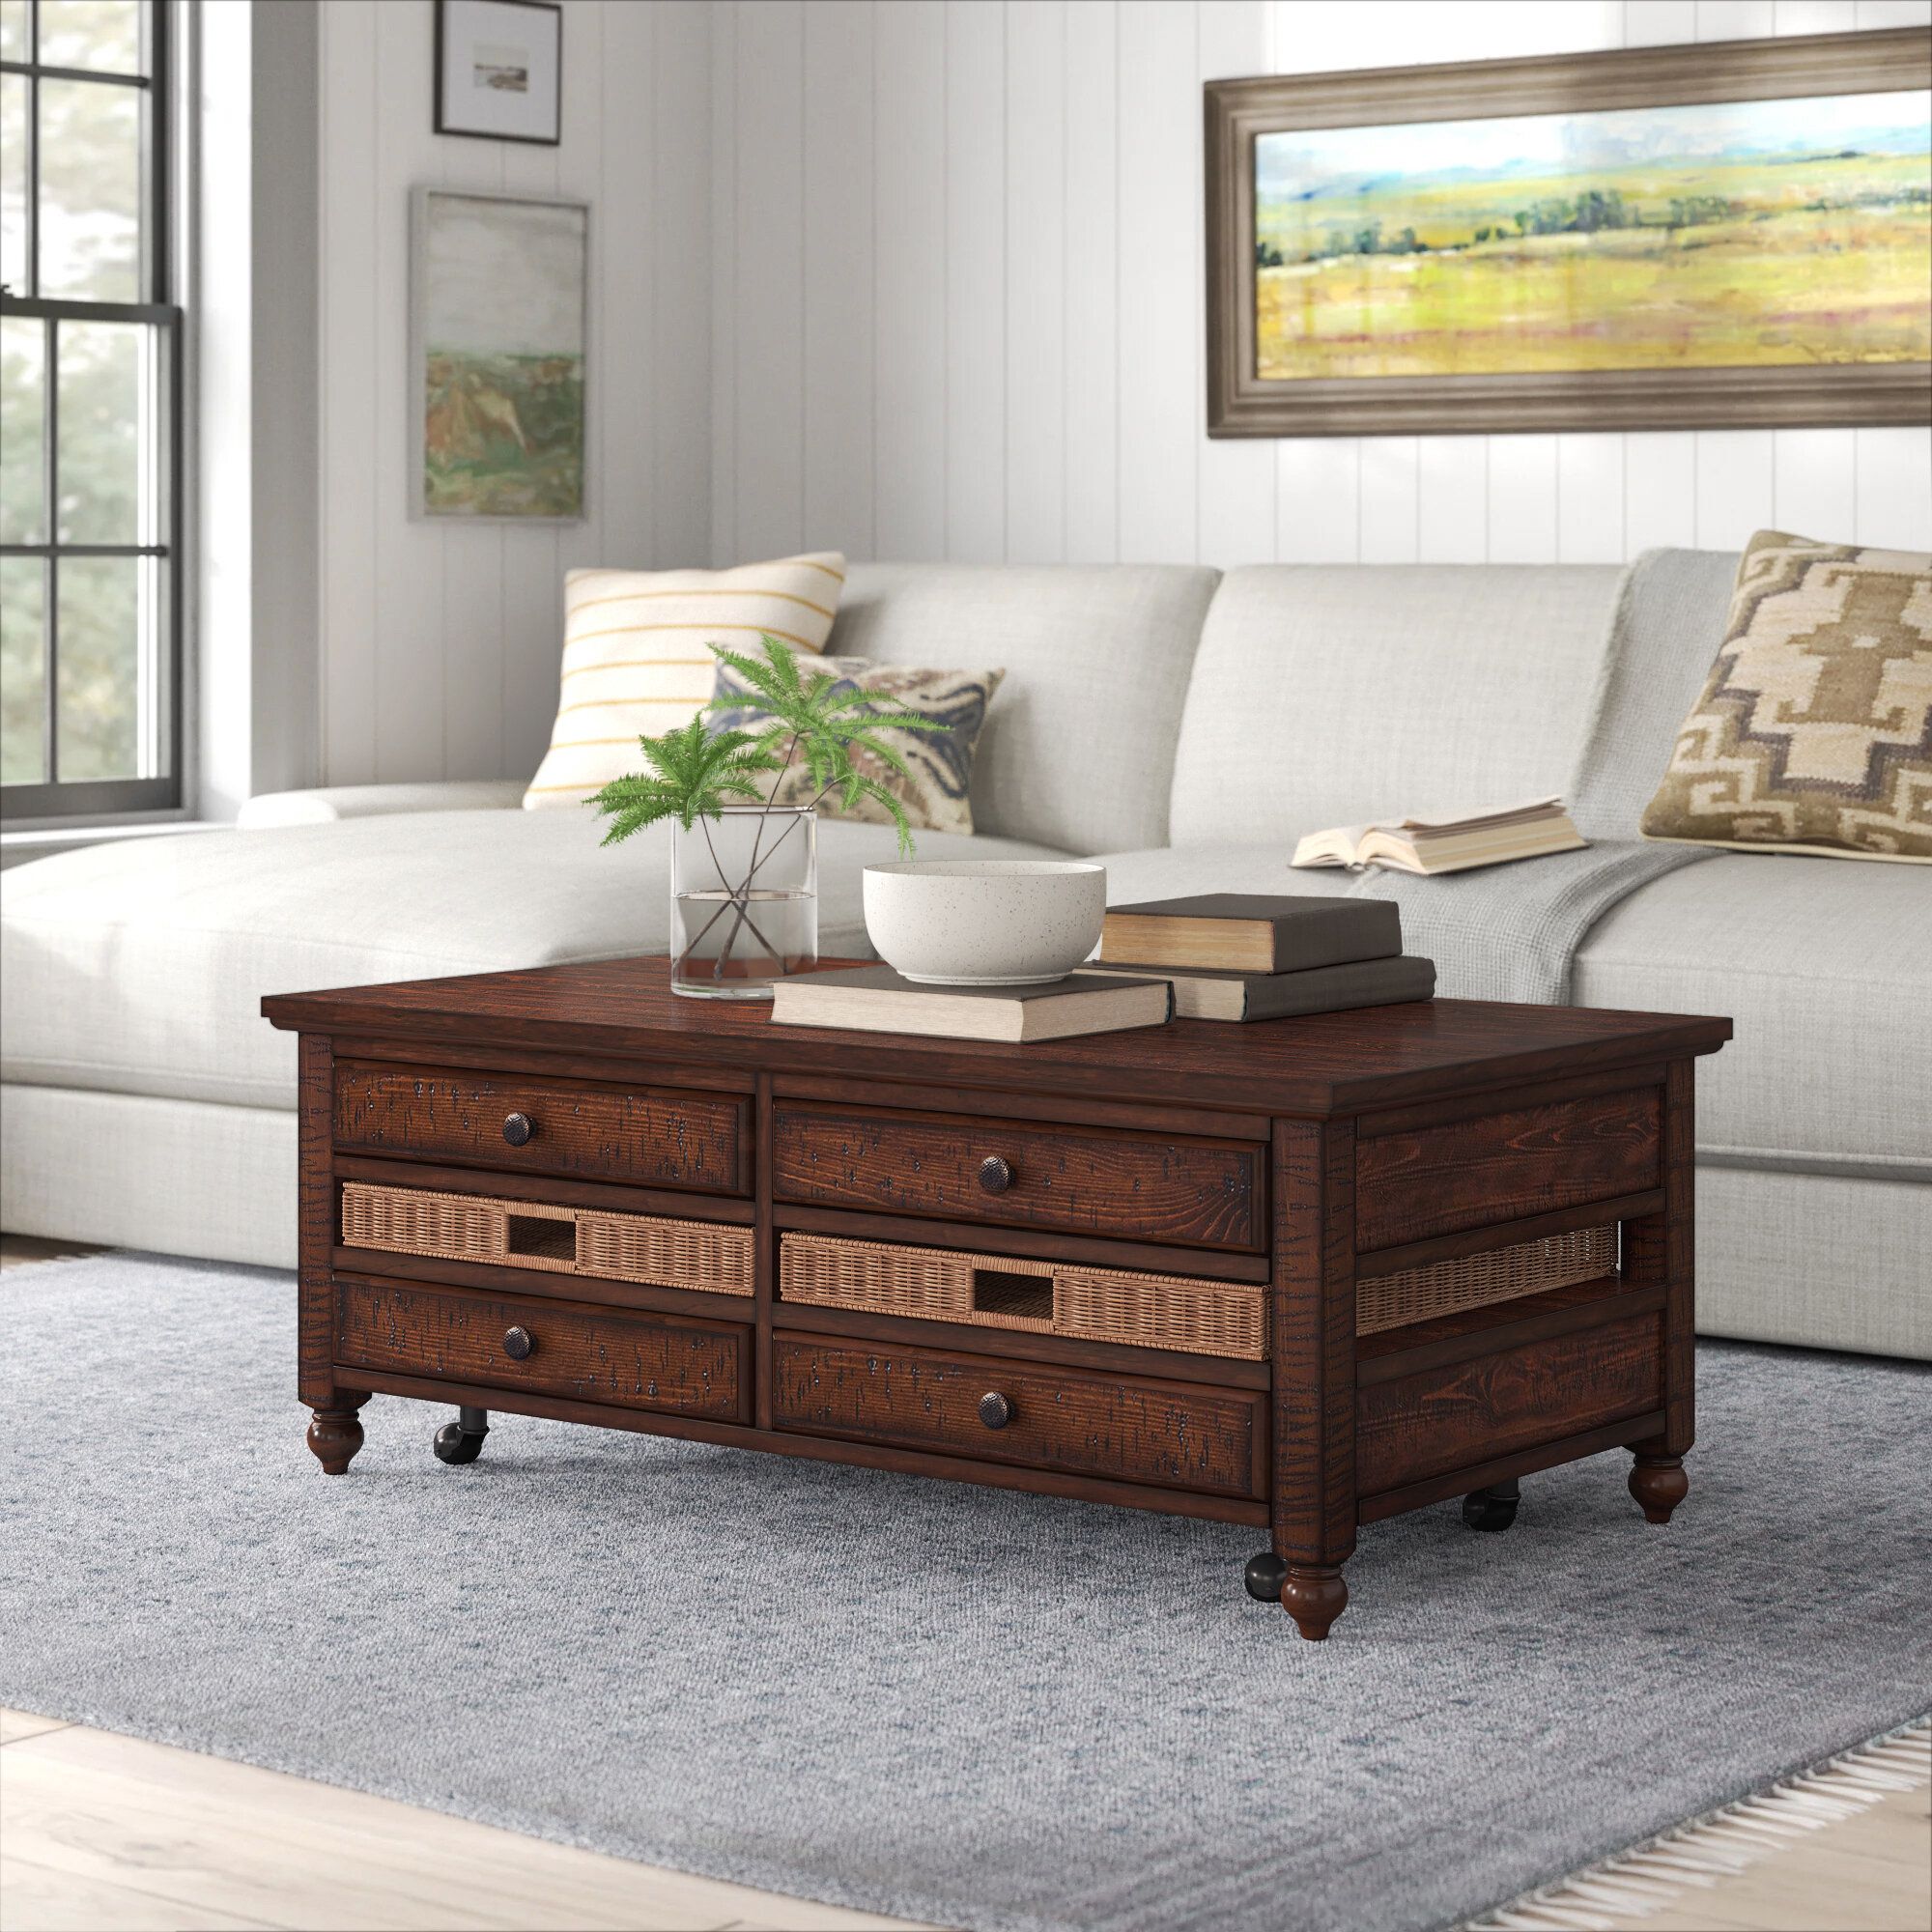 August Grove® Hebron Solid Wood Lift Top Coffee Table With Storage &  Reviews | Wayfair Inside Lift Top Coffee Tables (View 11 of 20)